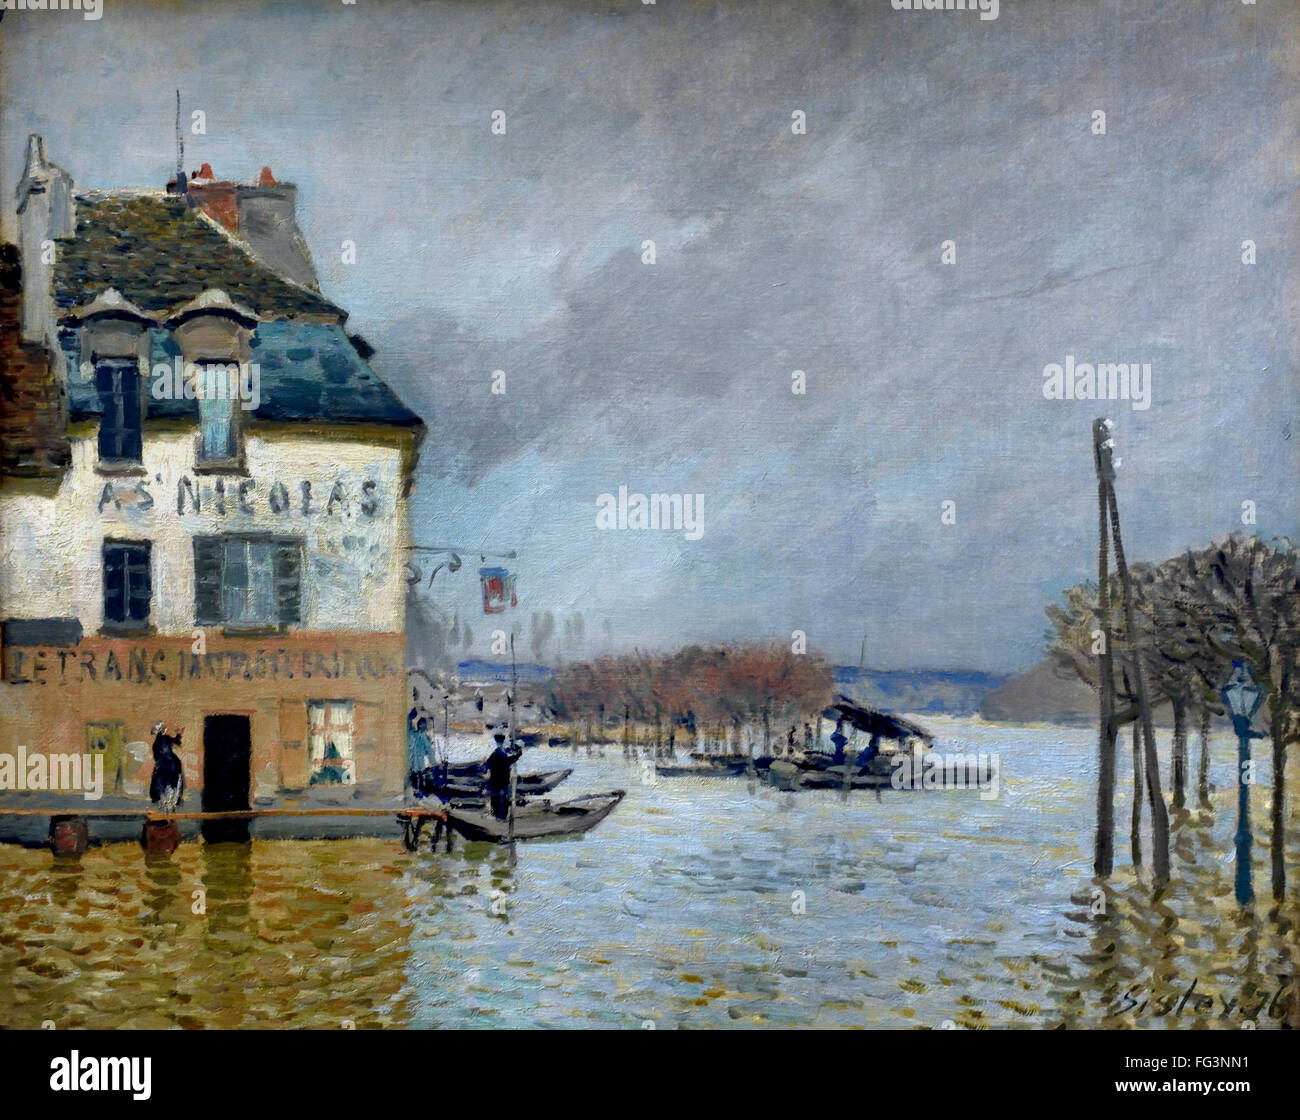 L’INONDATION À PORT MARLY - FLOOD IN PORT MARLY ALFRED SISLEY (1839 - 1899)  British / French Impressionist France Stock Photo